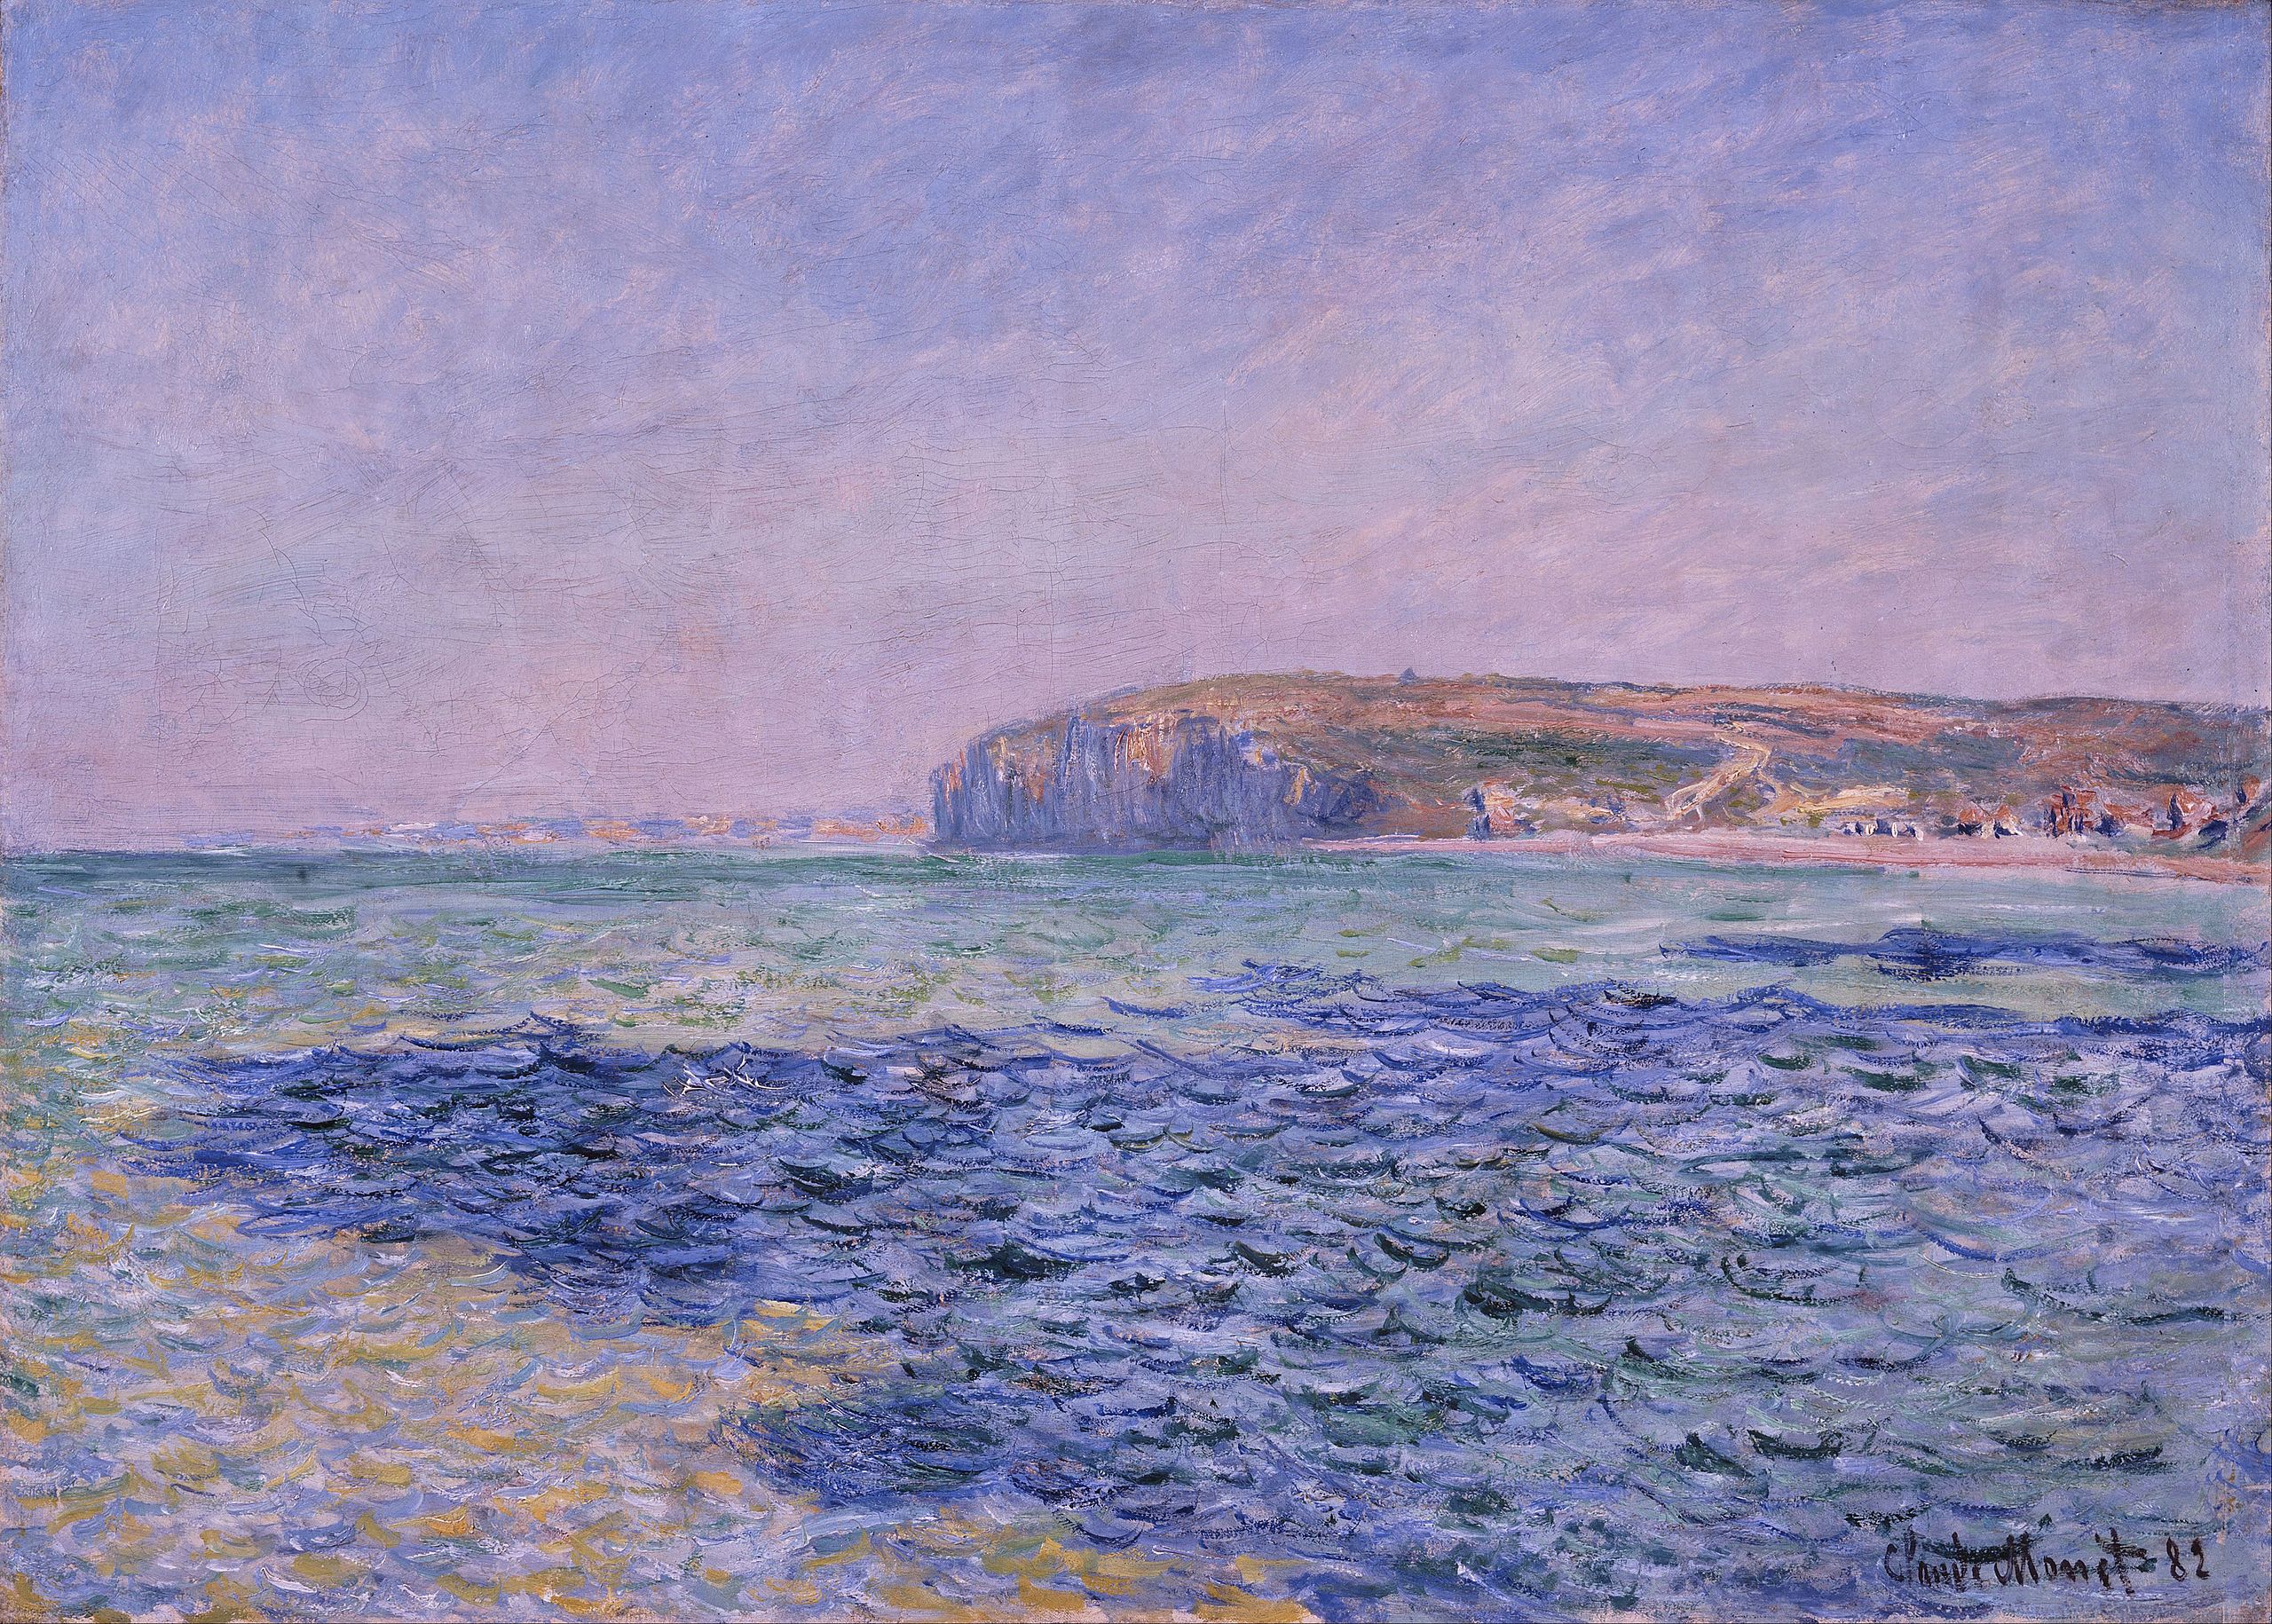 Shadows on the Sea. The Cliffs at Pourville by Claude Monet - 1882 - 80 x 57 cm Ny Carlsberg Glyptotek